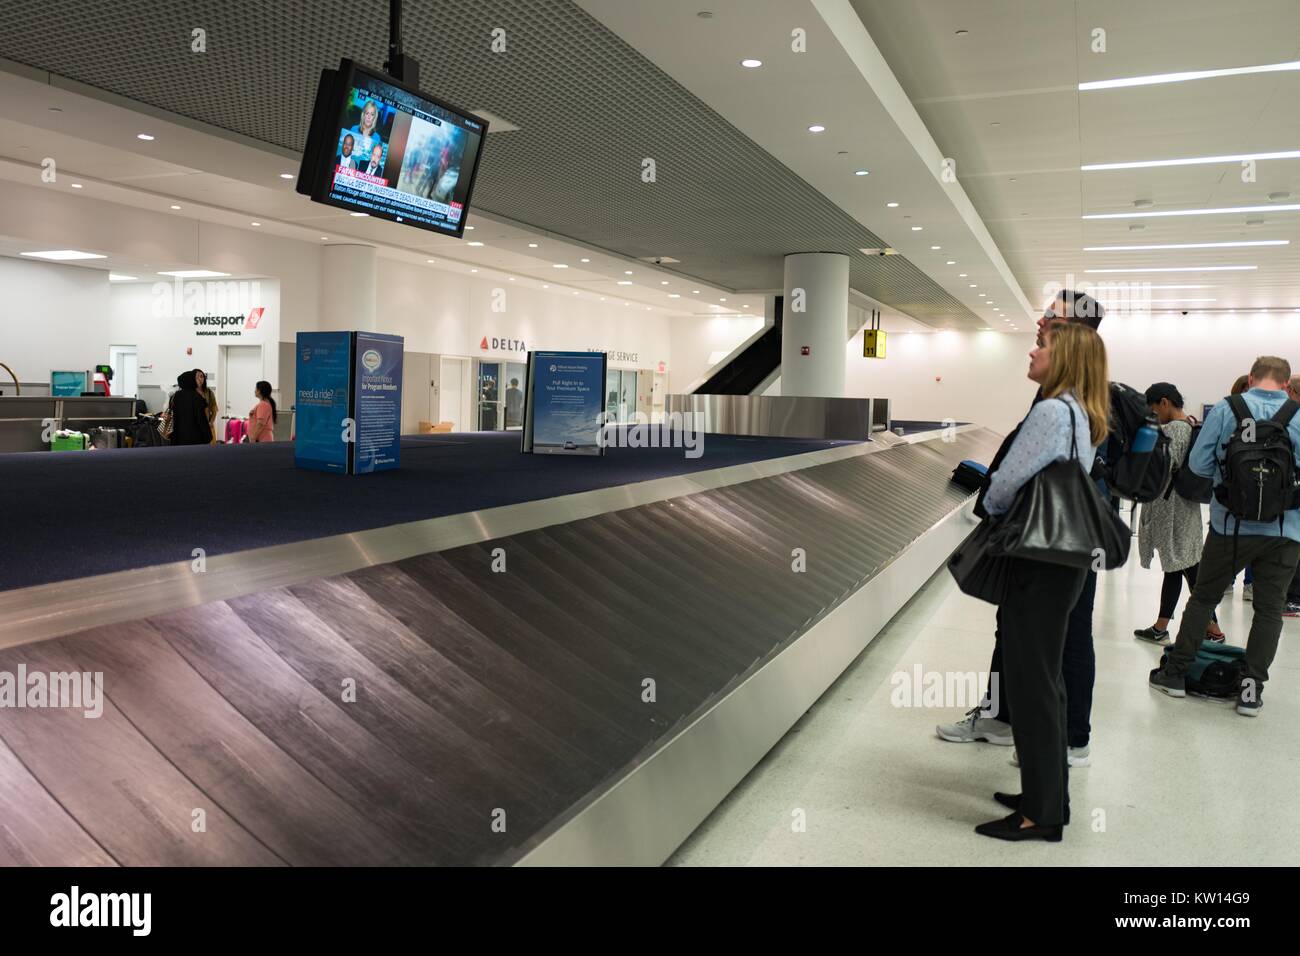 Travelers at Newark International Airport watch a news broadcast about a recent shooting while waiting for their bags to arrive at a baggage carousel, Newark, New Jersey, July, 2016. Stock Photo